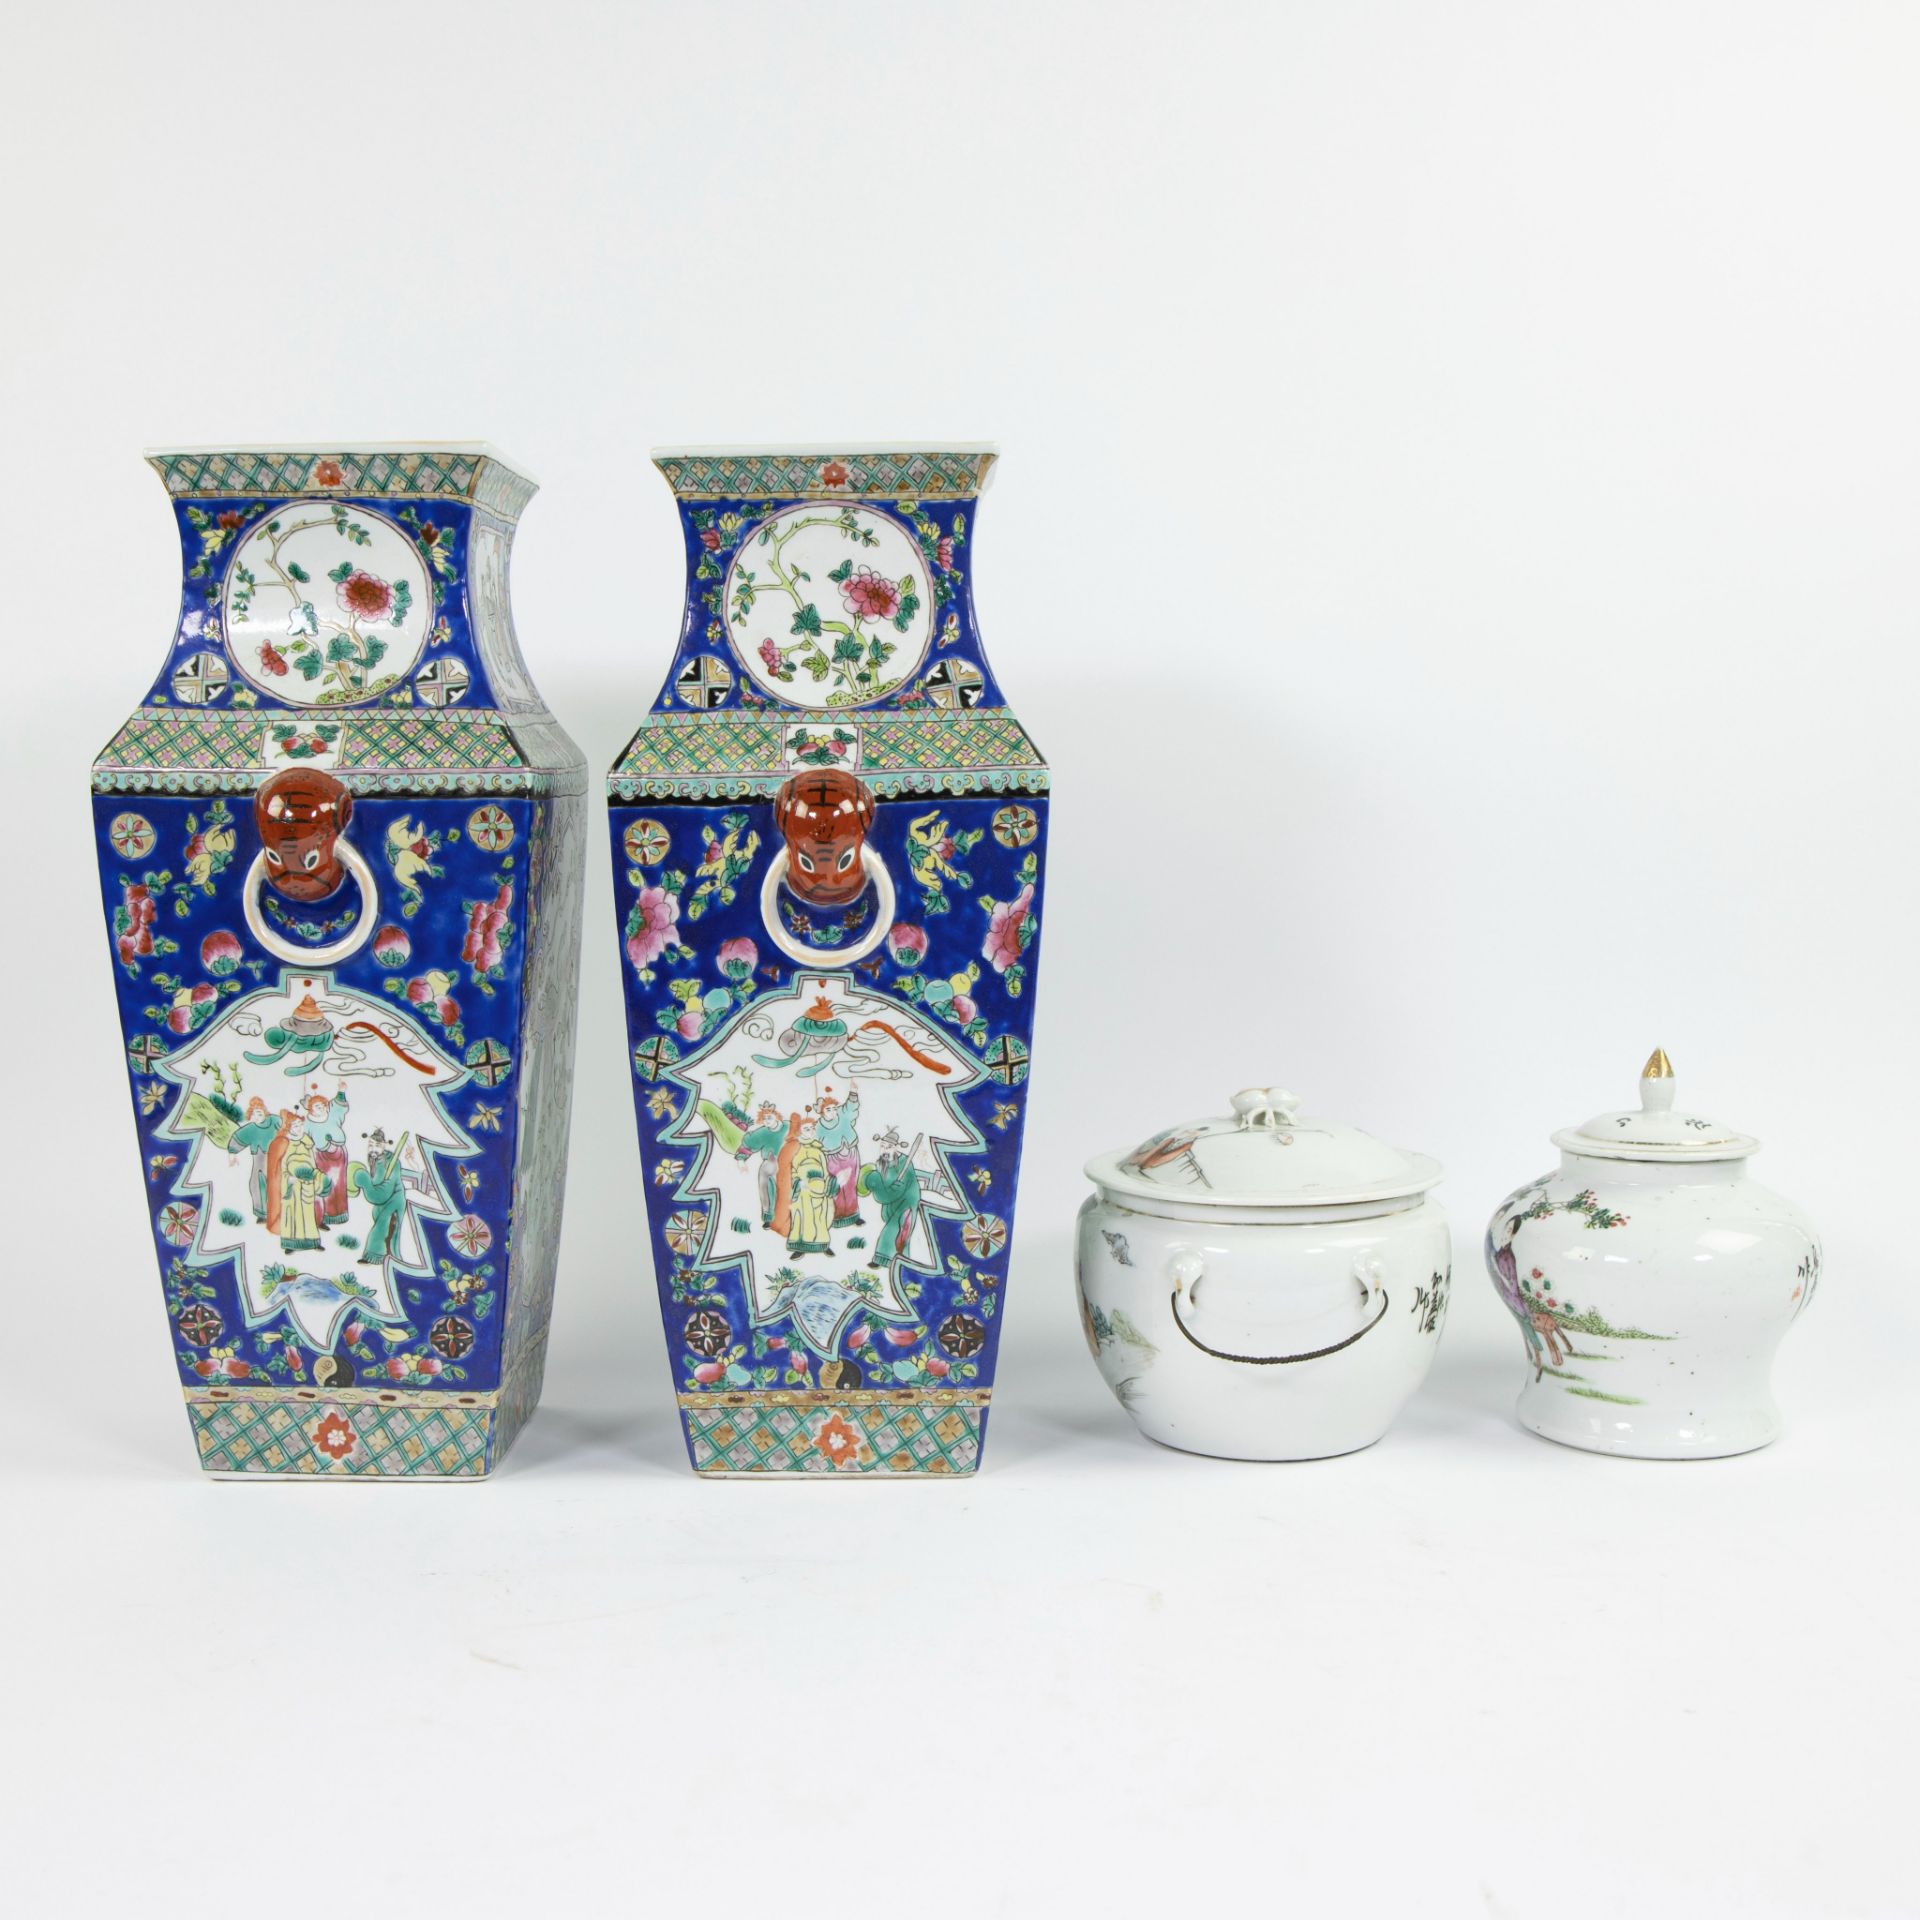 A collection of Chinese porcelain, 2 19th century lidded jars and a pair of blue famille rose vases - Image 2 of 8